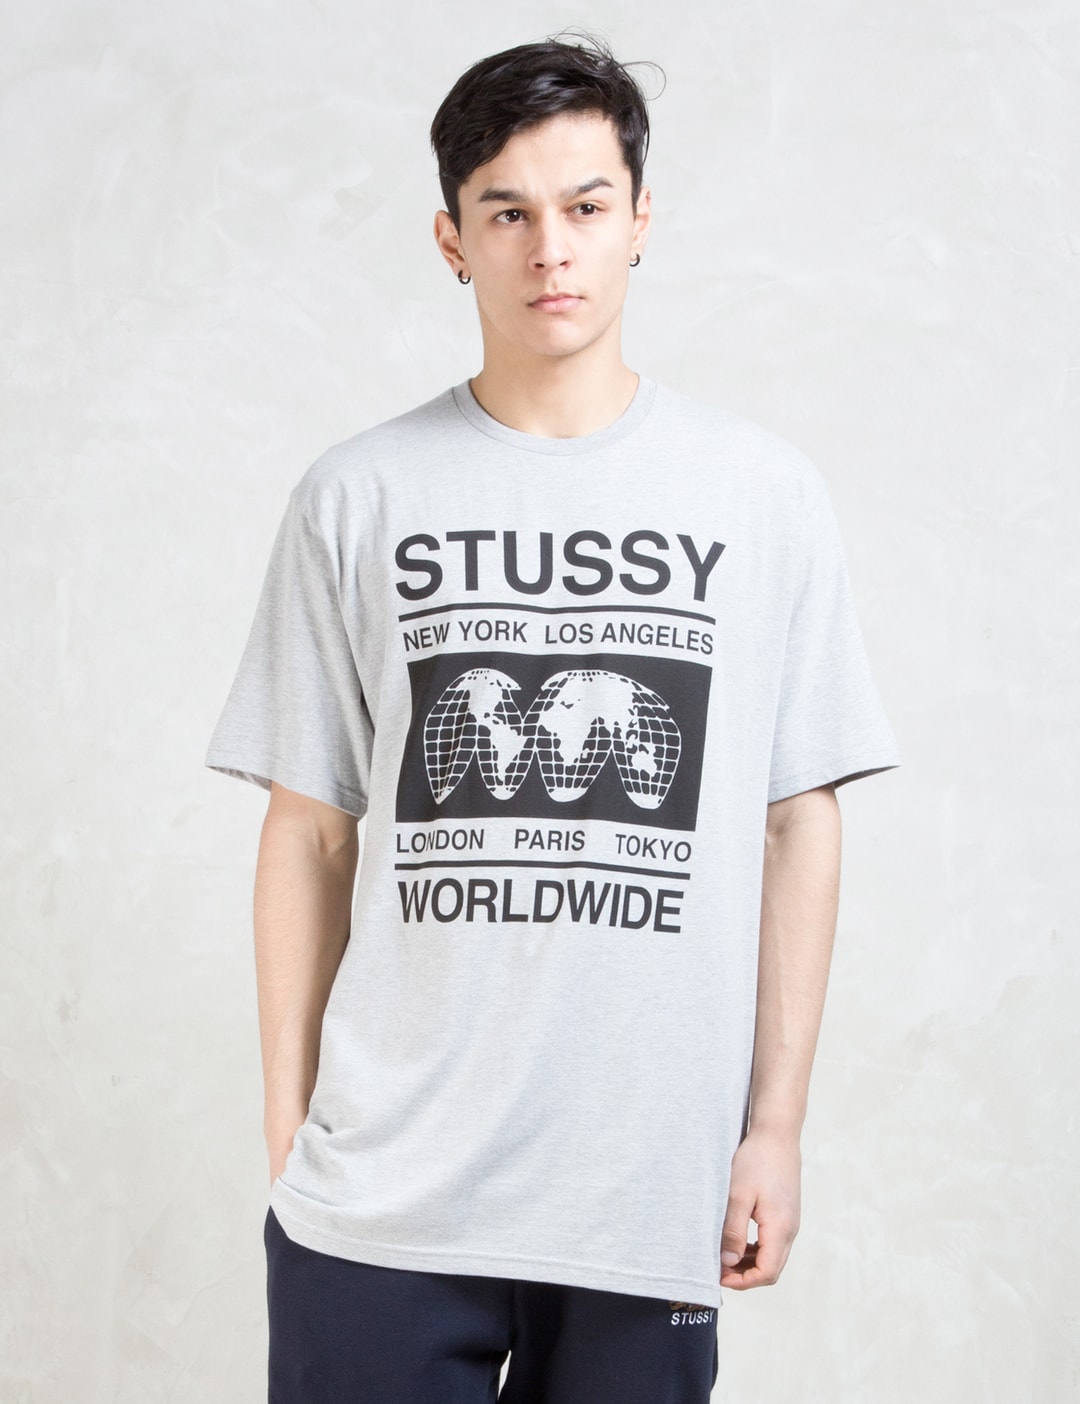 Stüssy - Worldwide Map T-Shirt | HBX - Globally Curated Fashion and ...